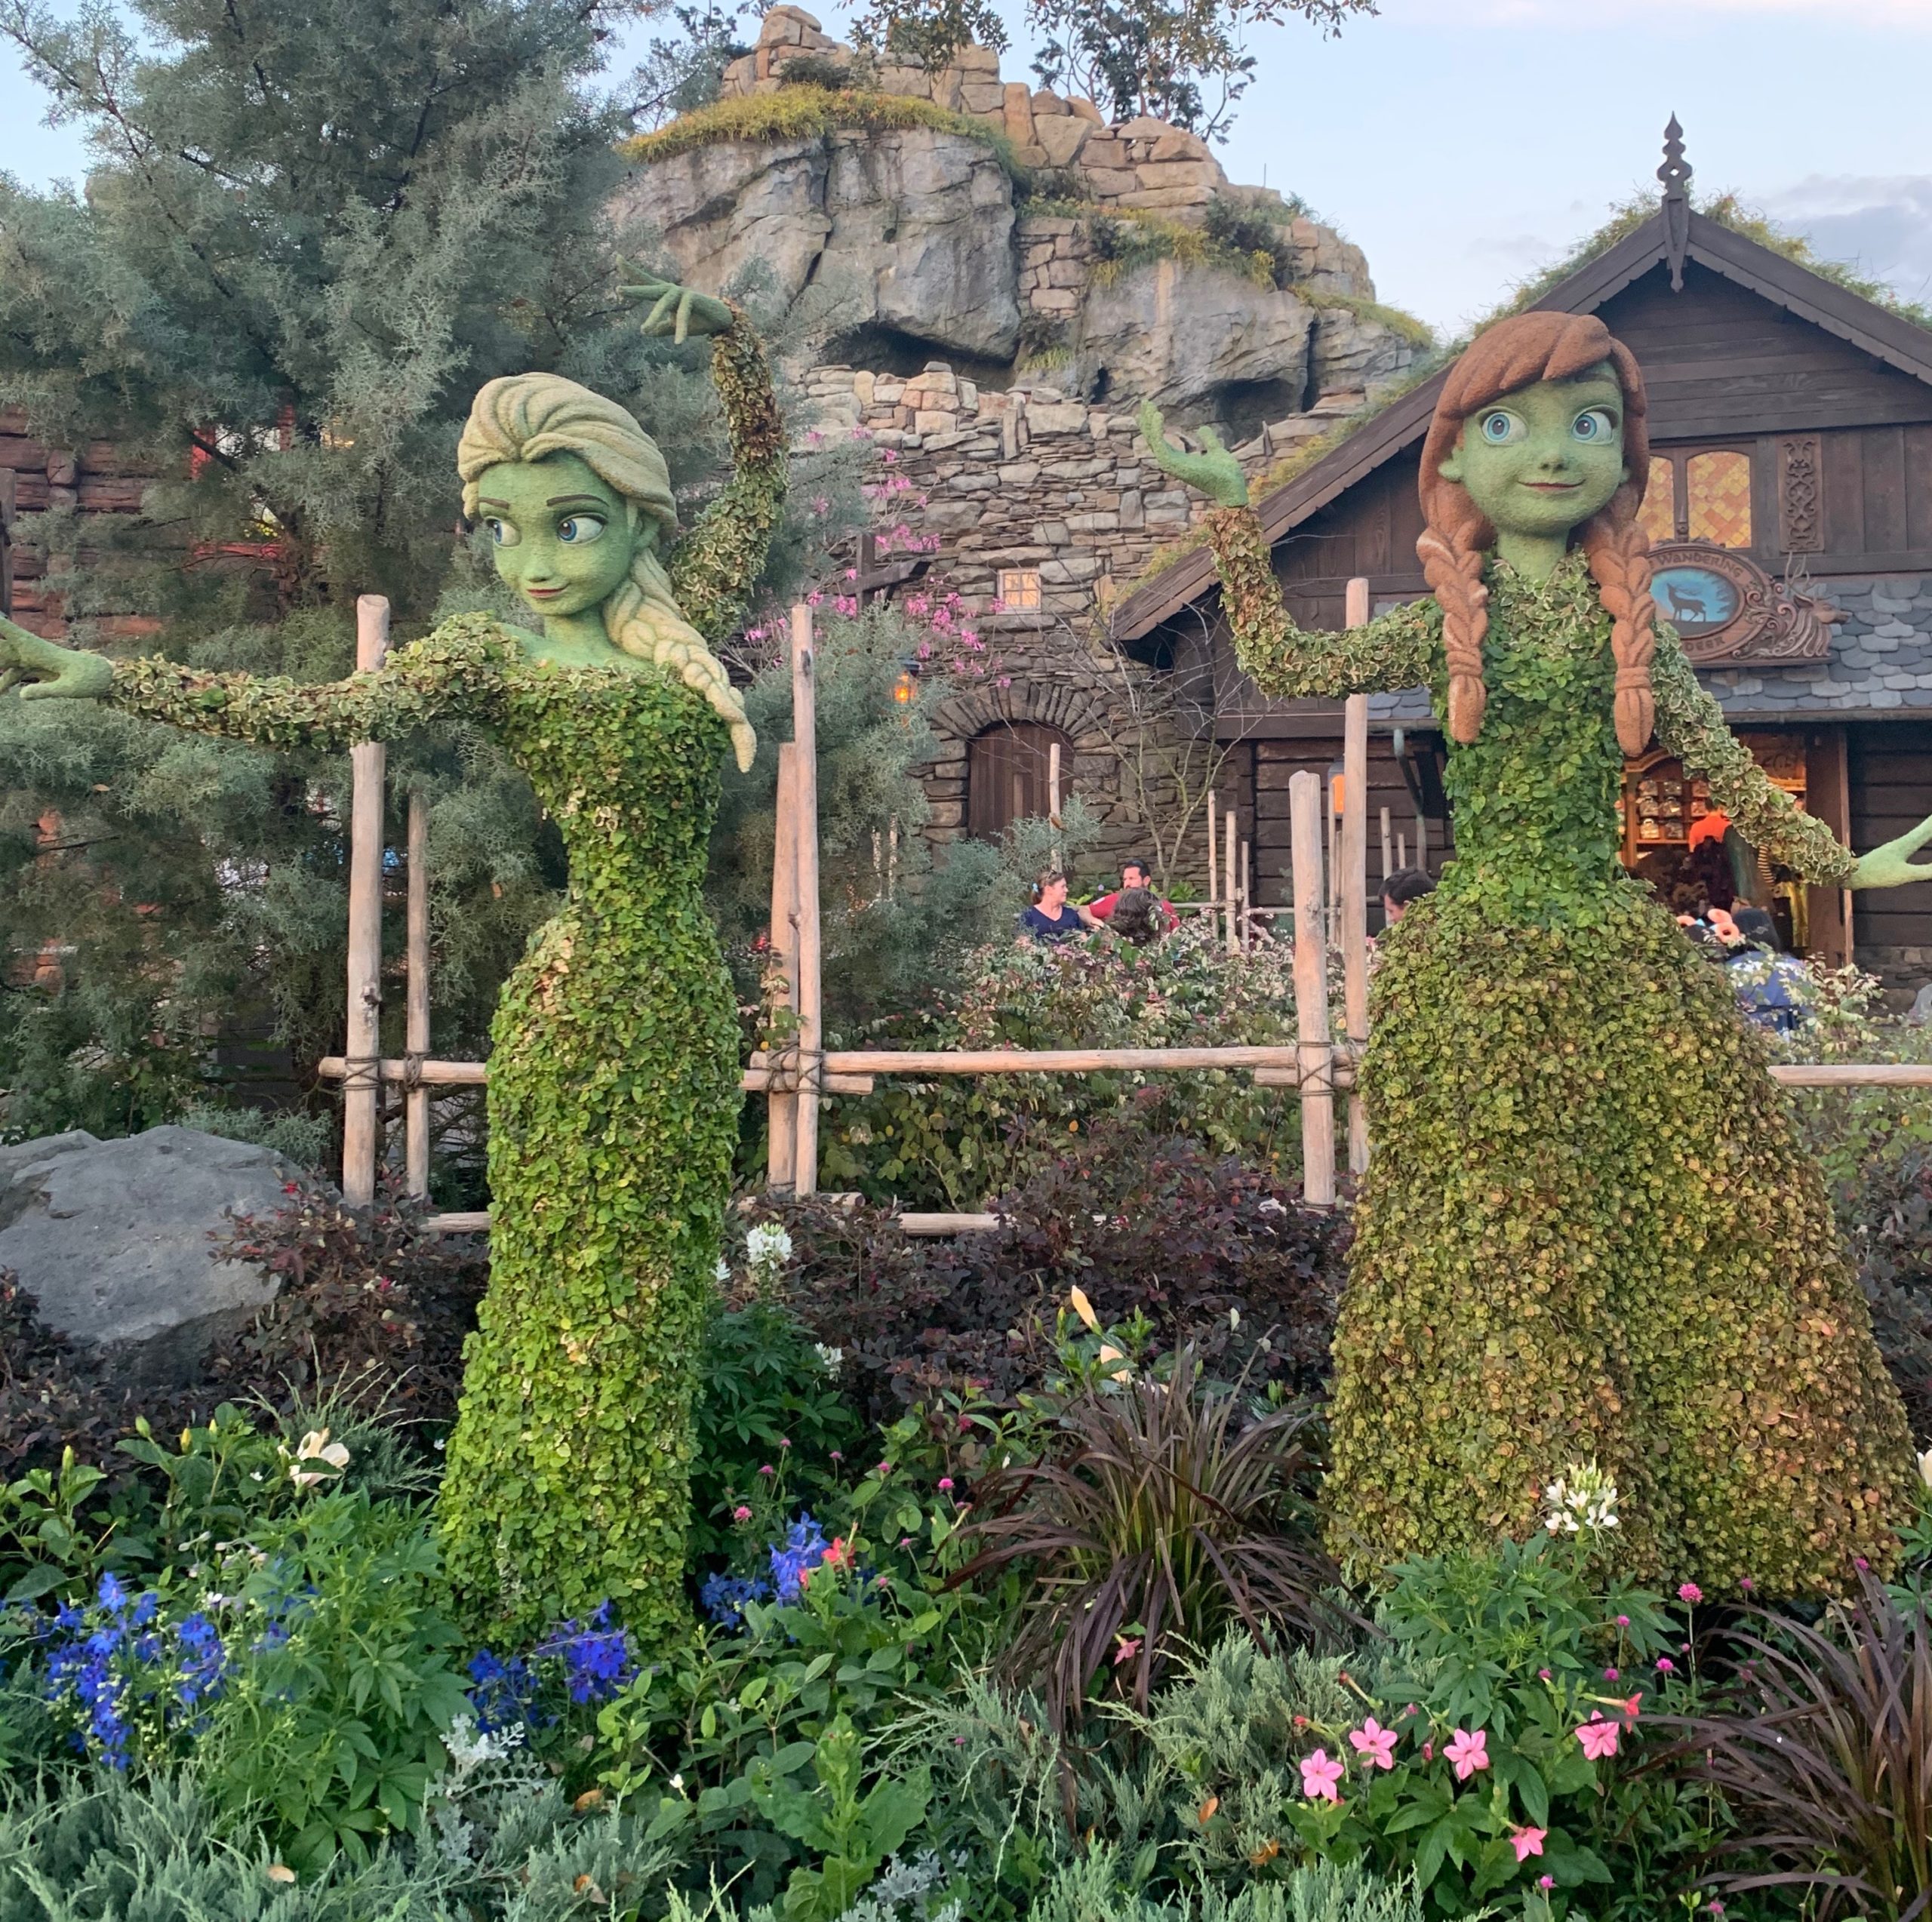 Anna and Elsa Topiaries Epcot Flower and Garden Festival